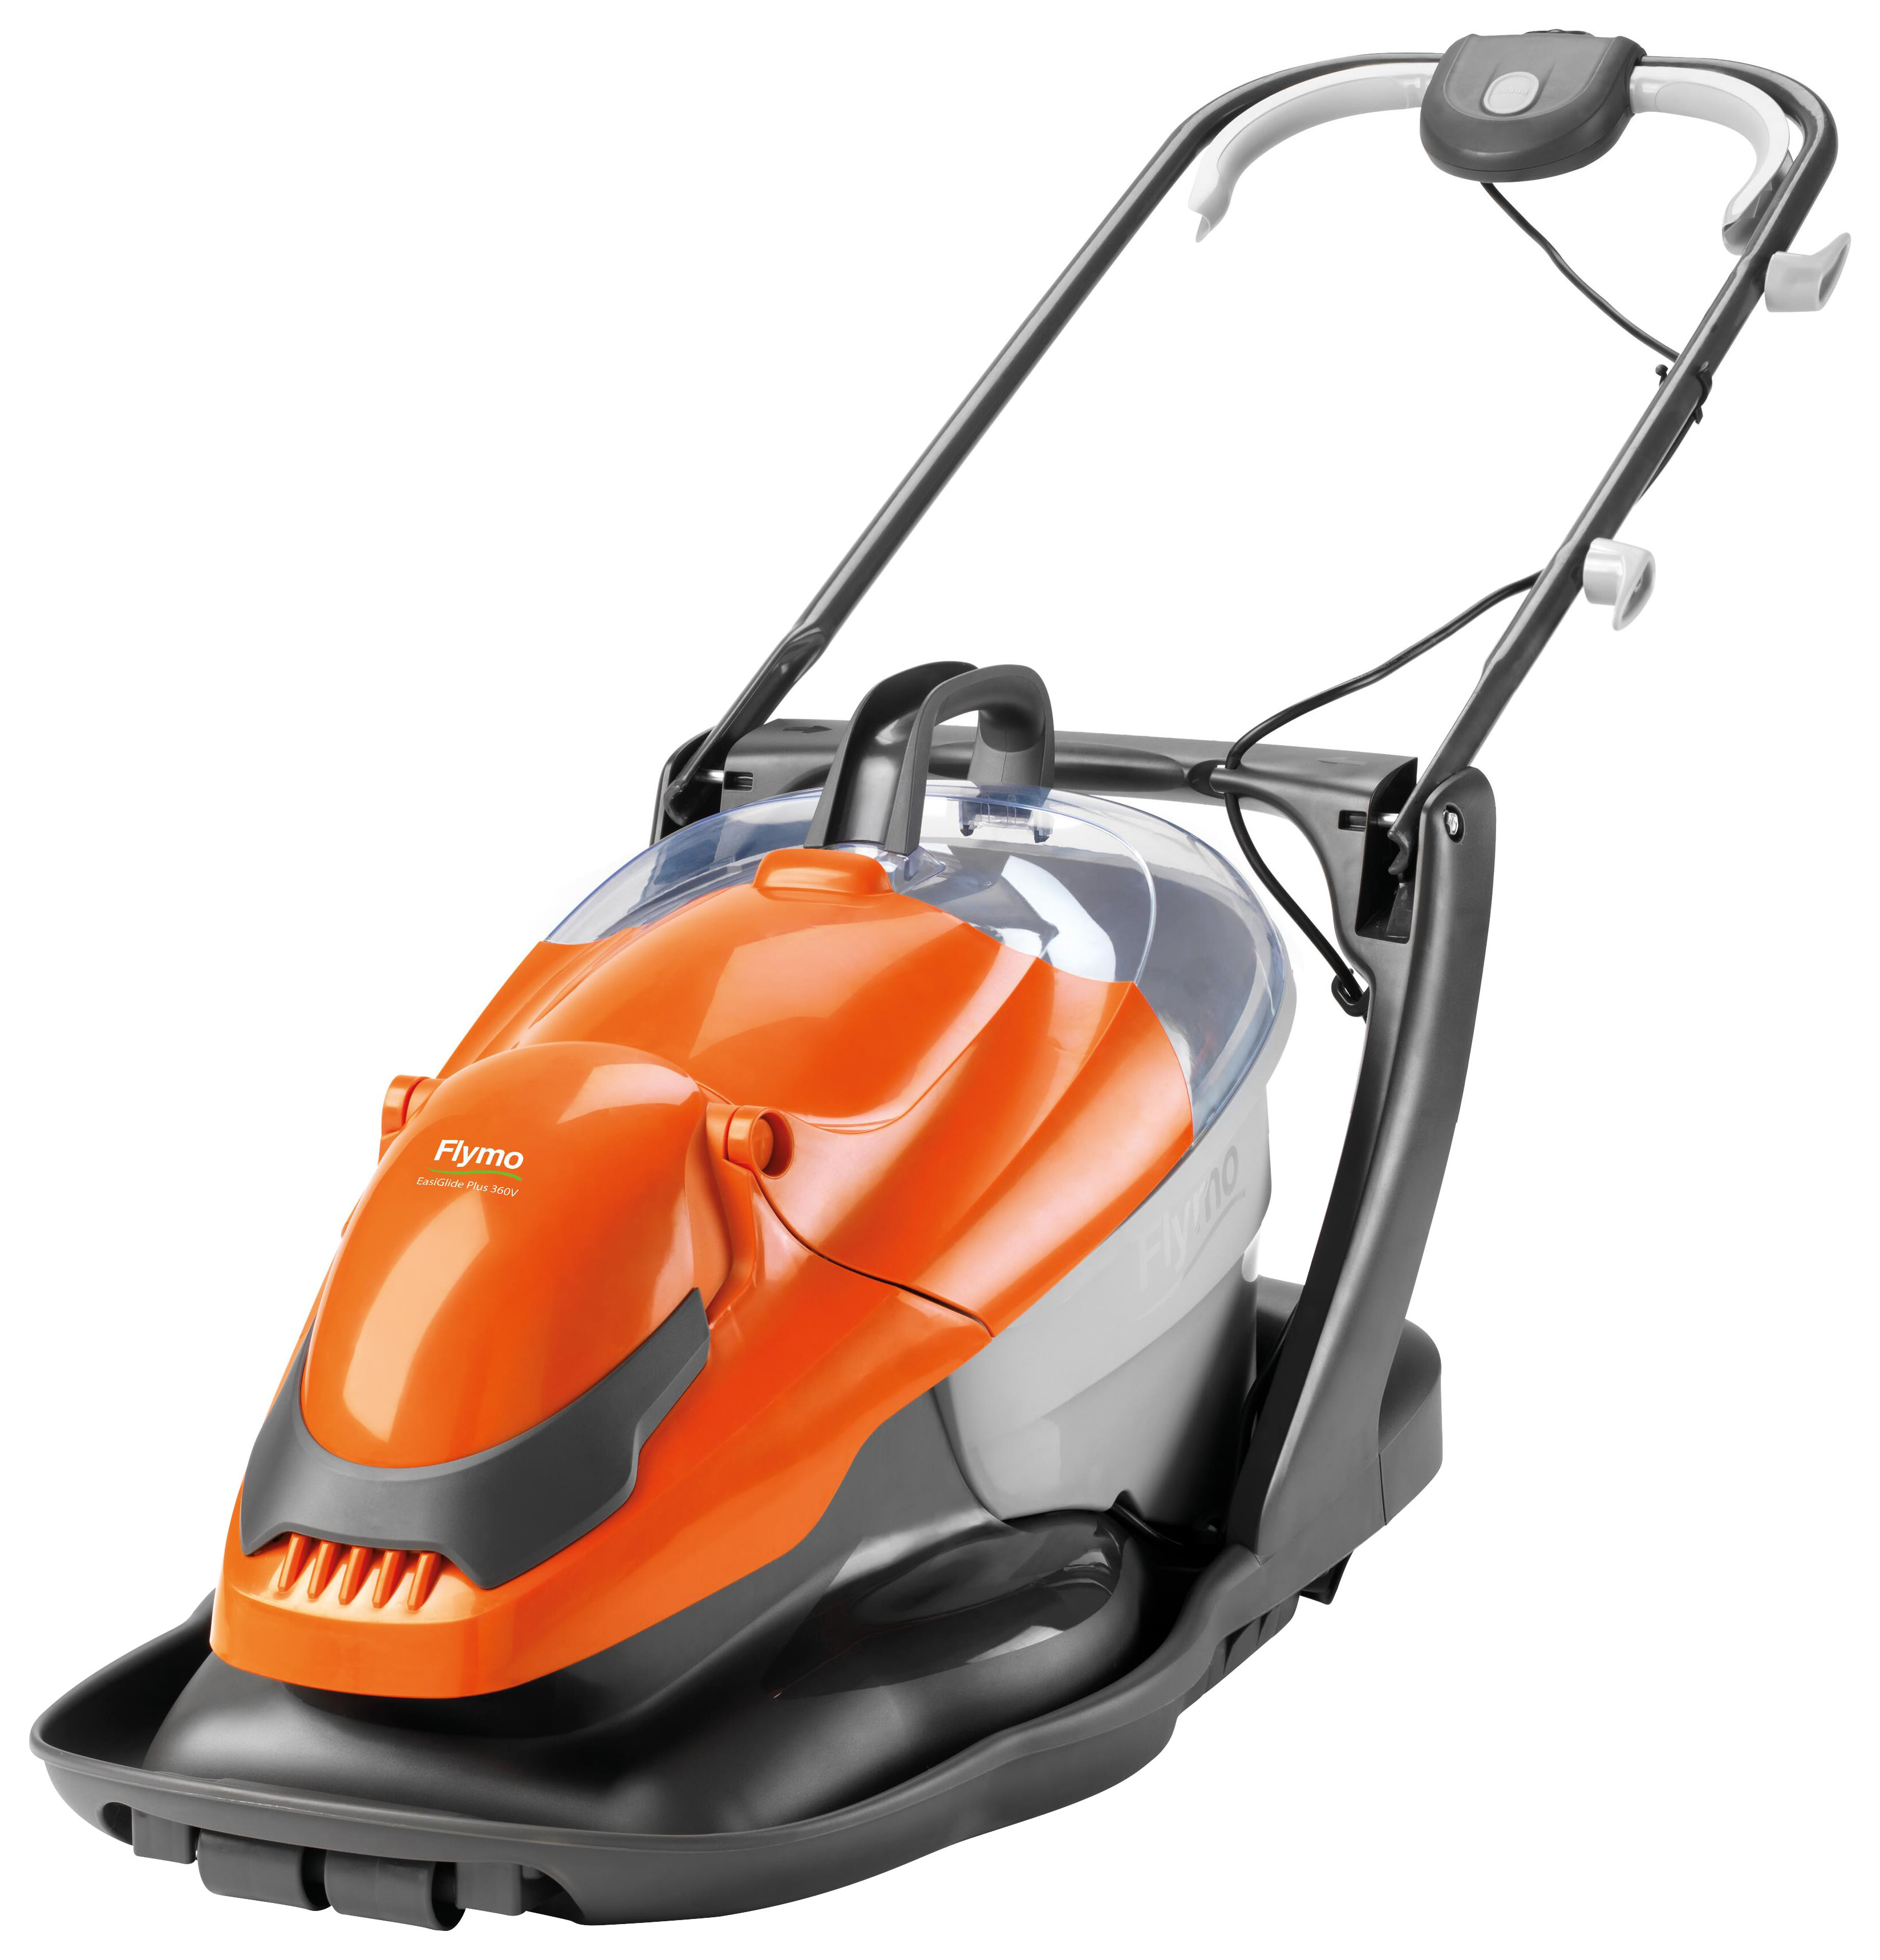 Flymo EasiGlide Plus 360V Corded Hover Lawnmower -